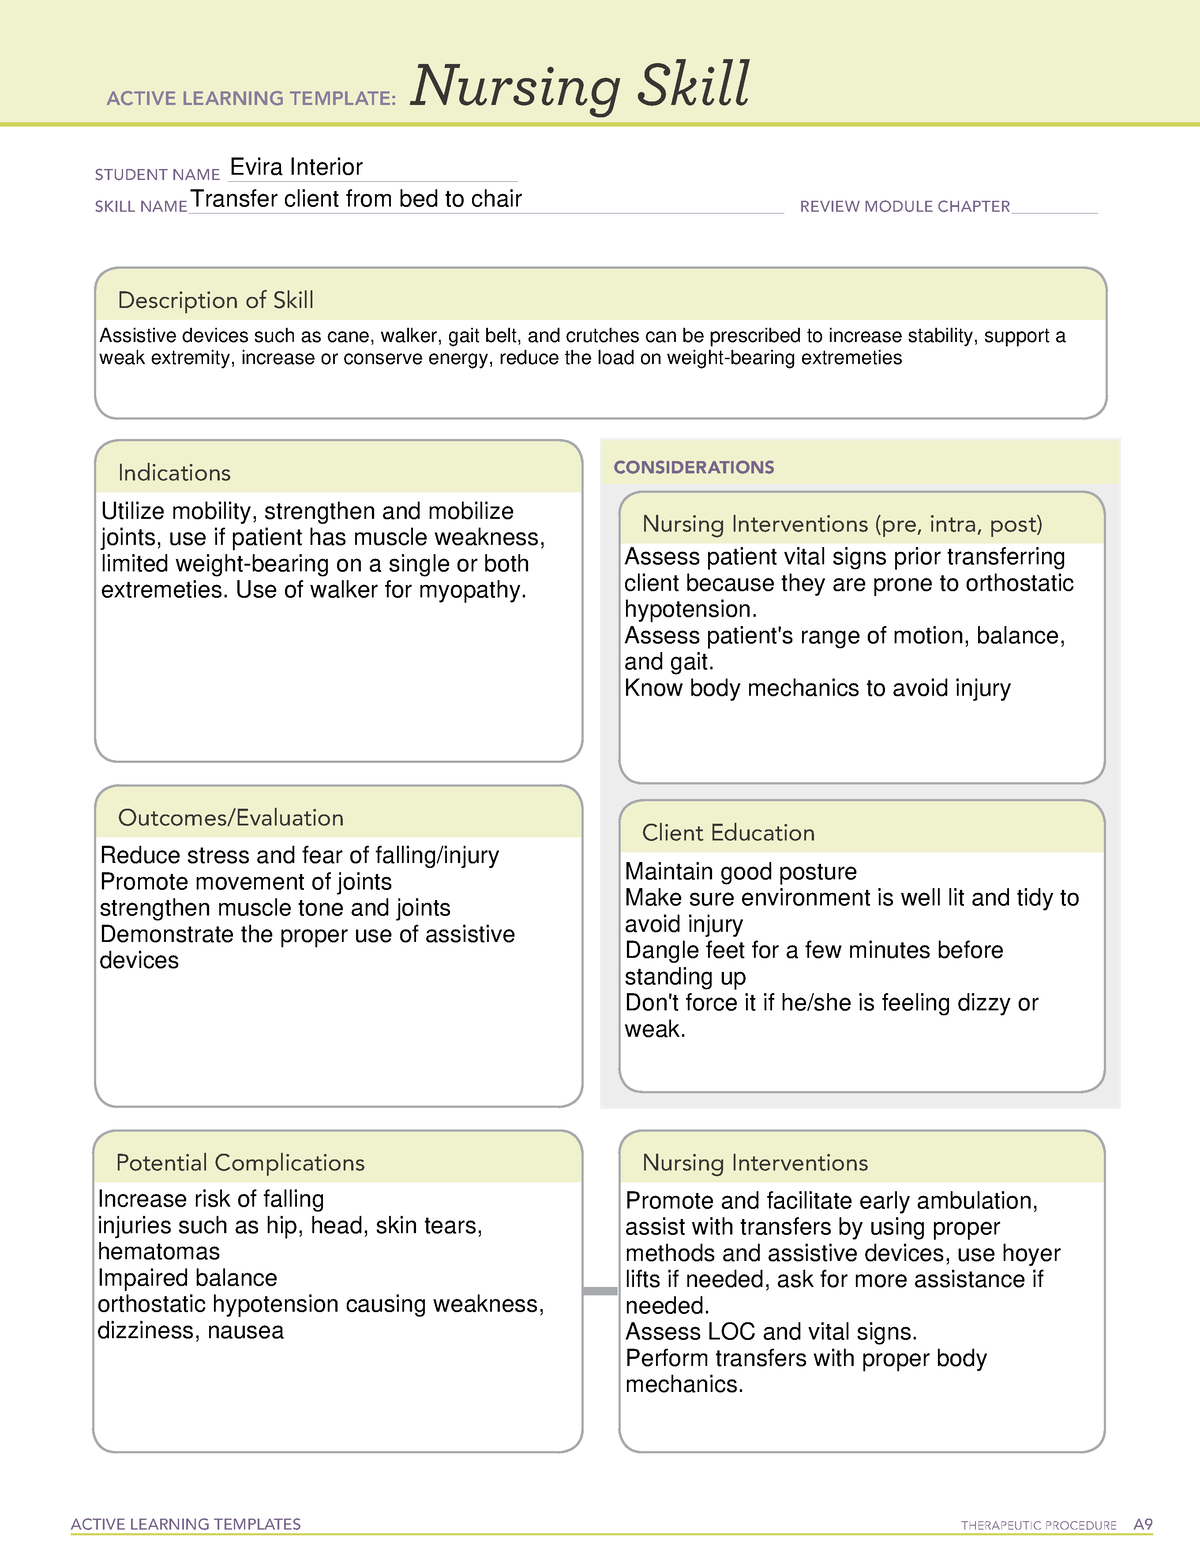 transfer-alt-nursing-skill-form-active-learning-templates-therapeutic